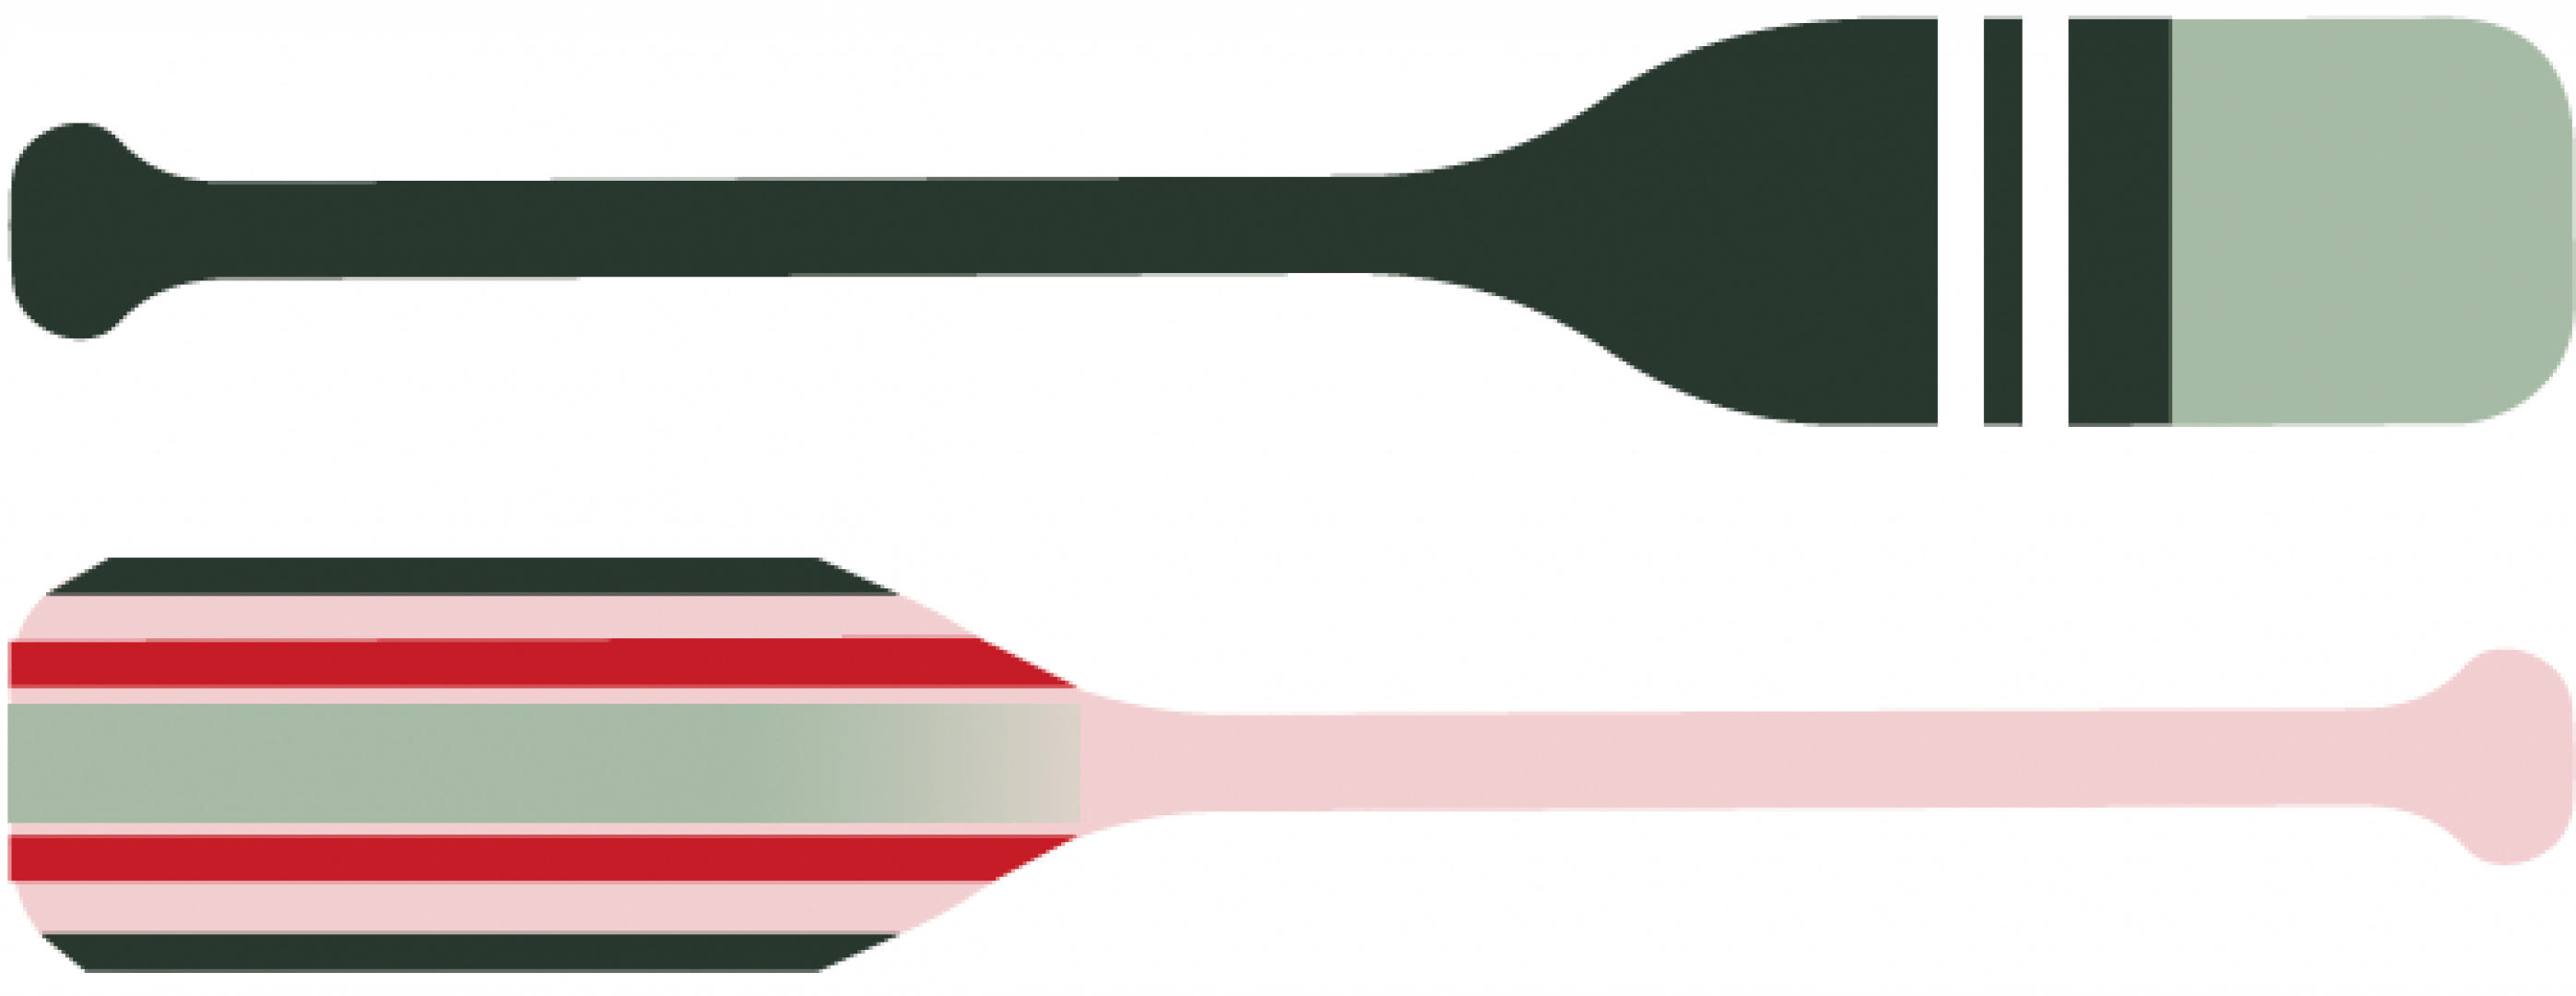 green, red and pink oars